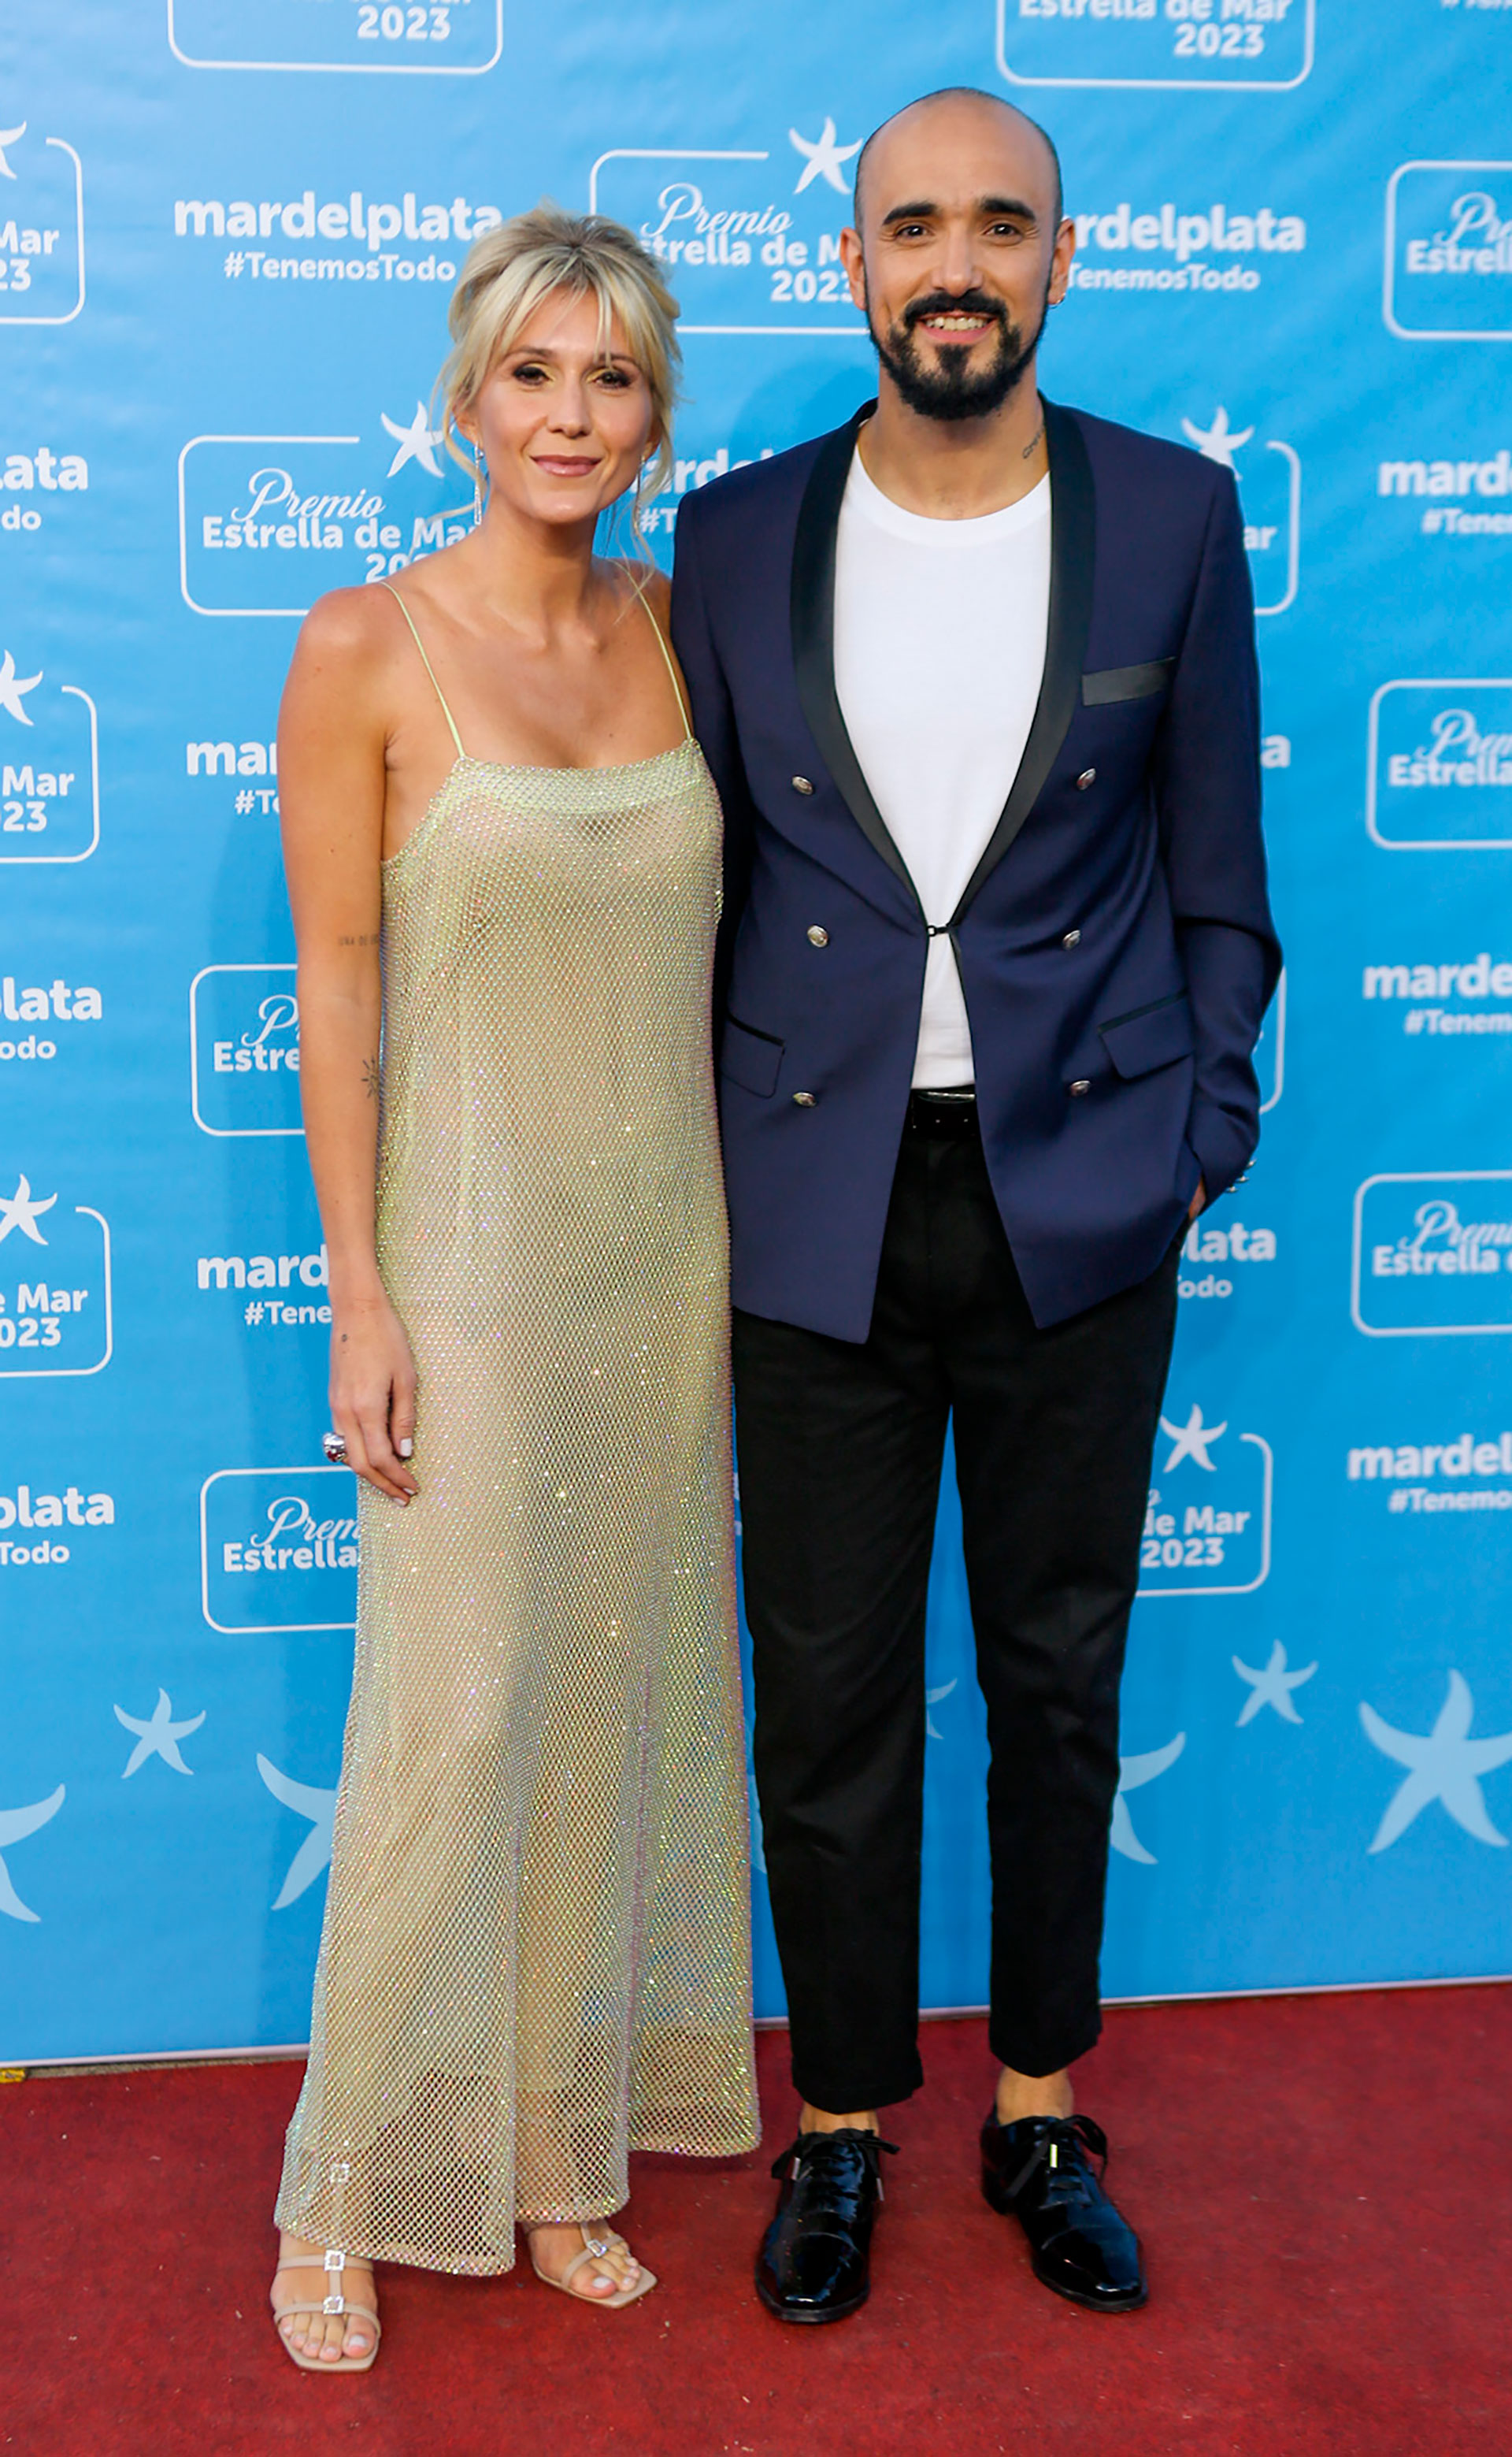 Abel Pintos and Mora Calabrese, present on the carpet (Christian Heit)